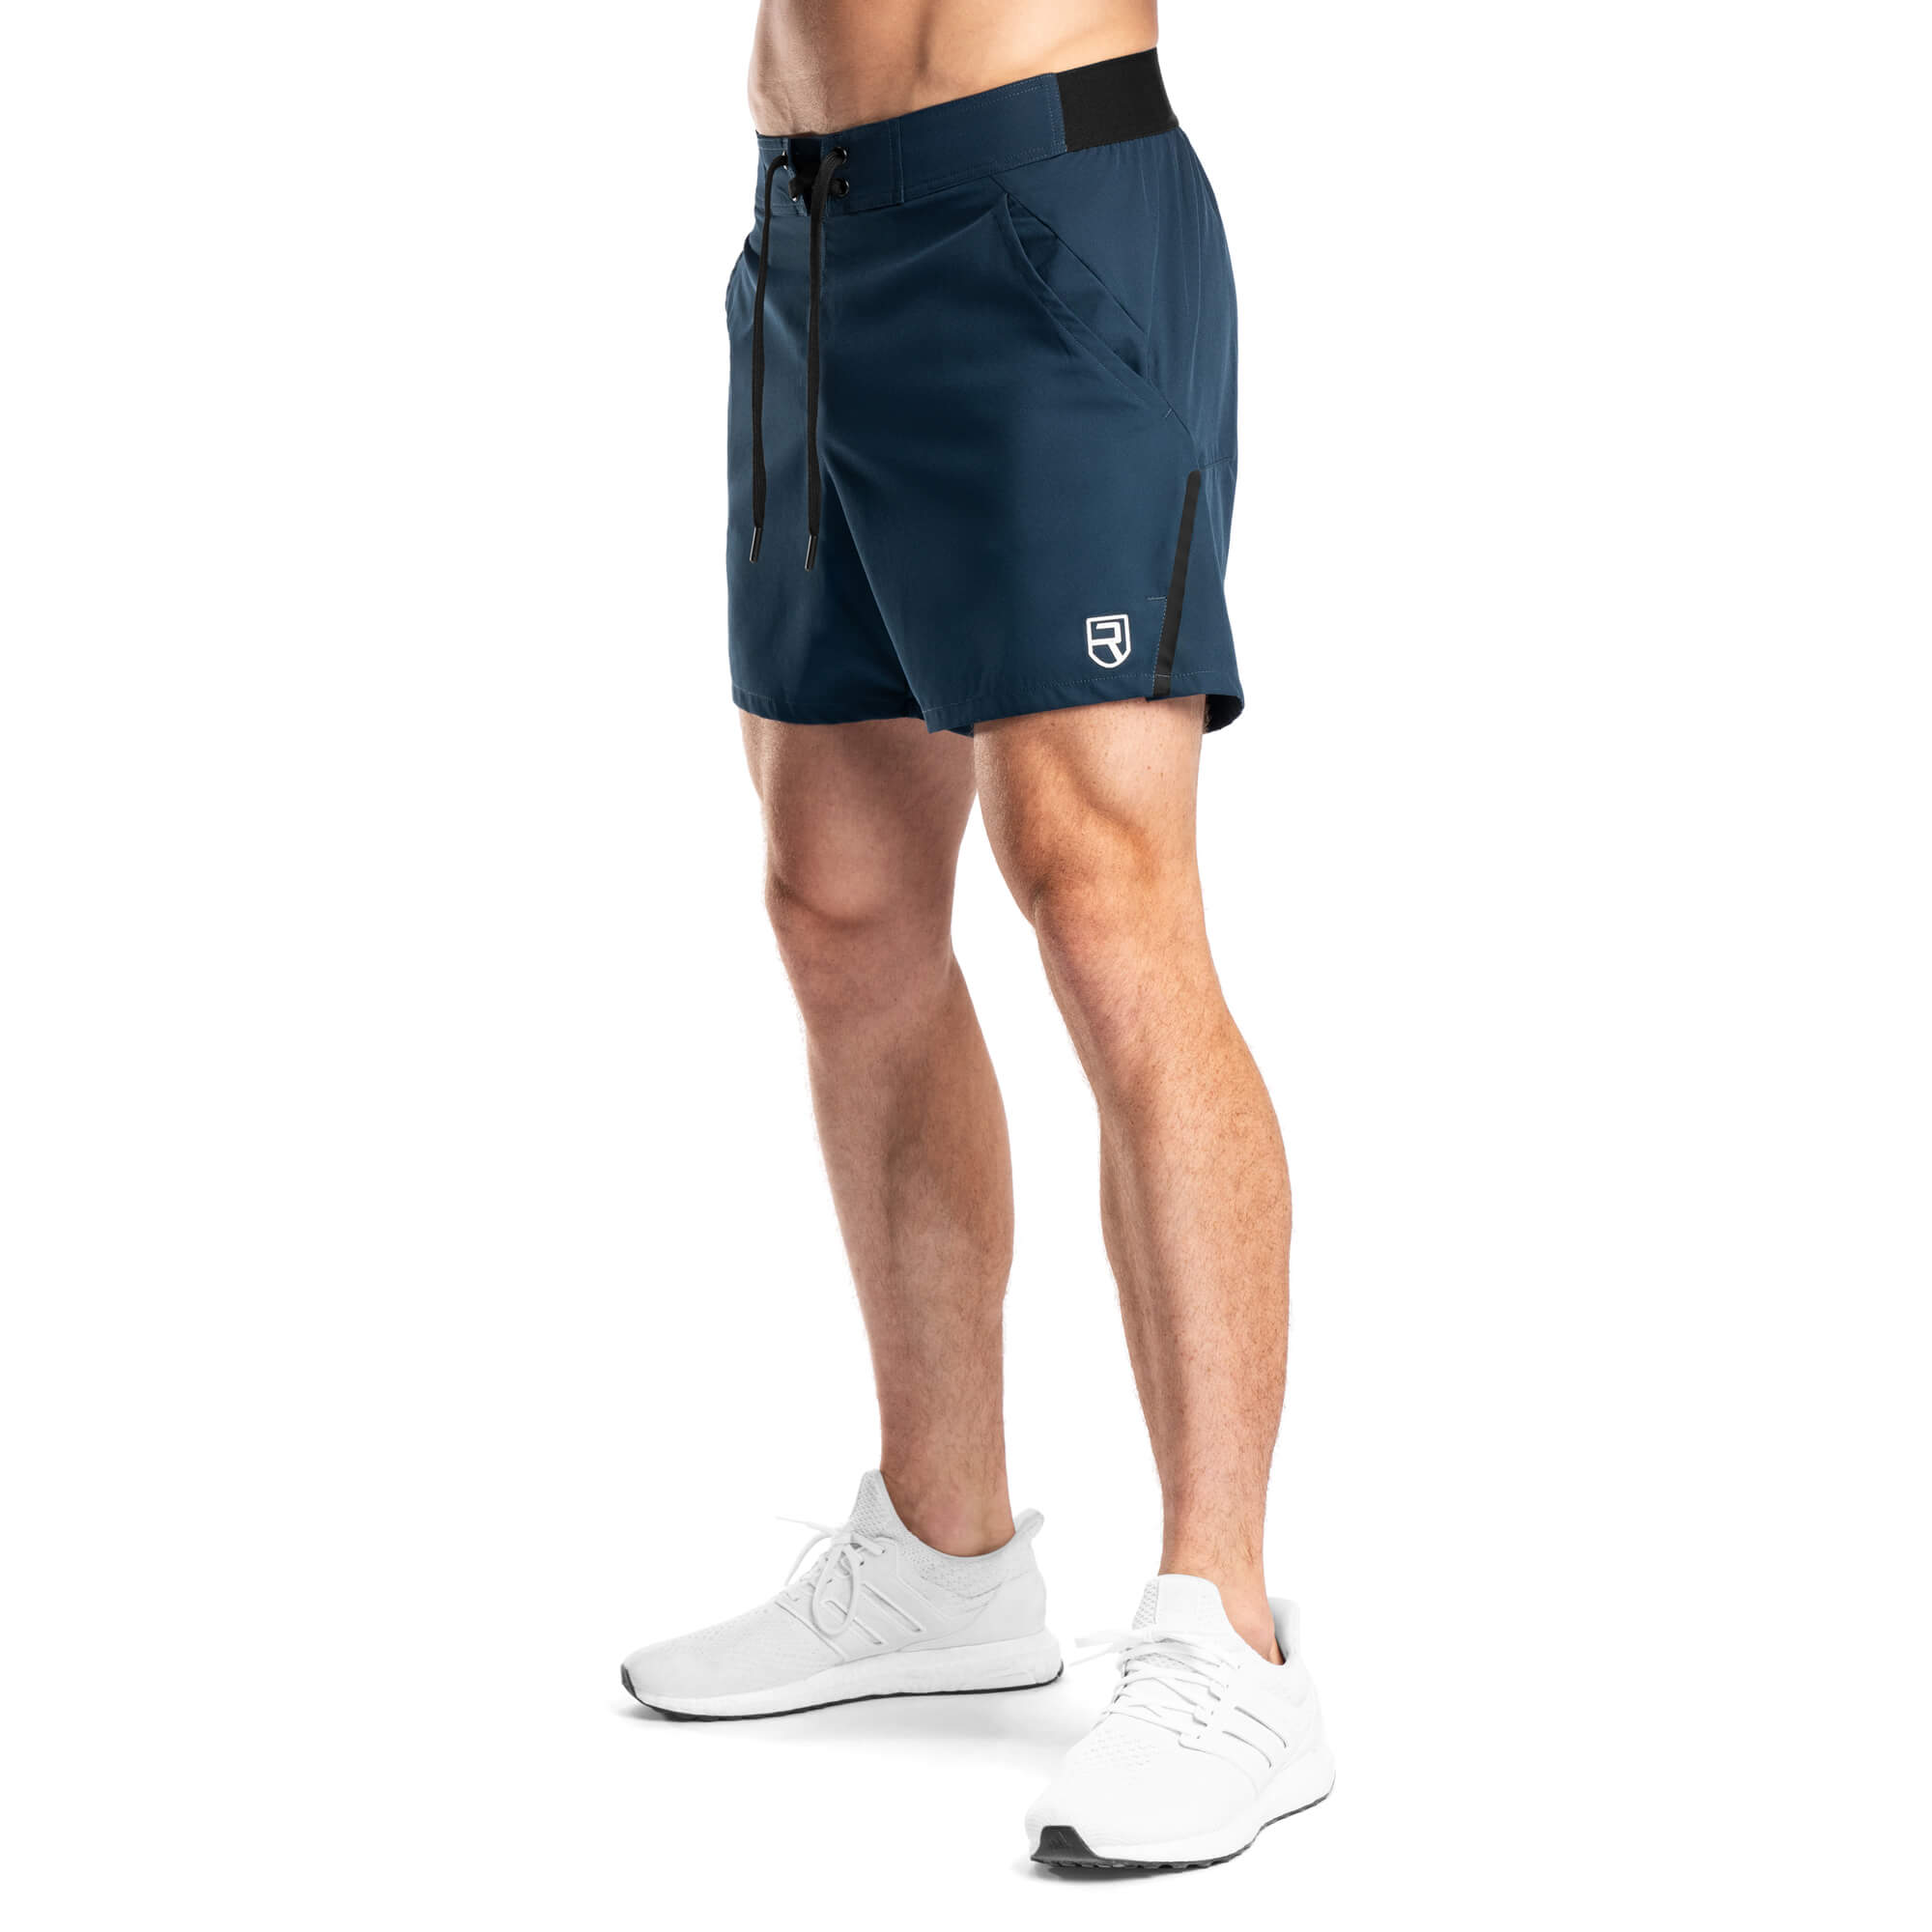 STRIKER ARRIBA SOCCER SHORTS AVAILABLE IN 5 COLORS